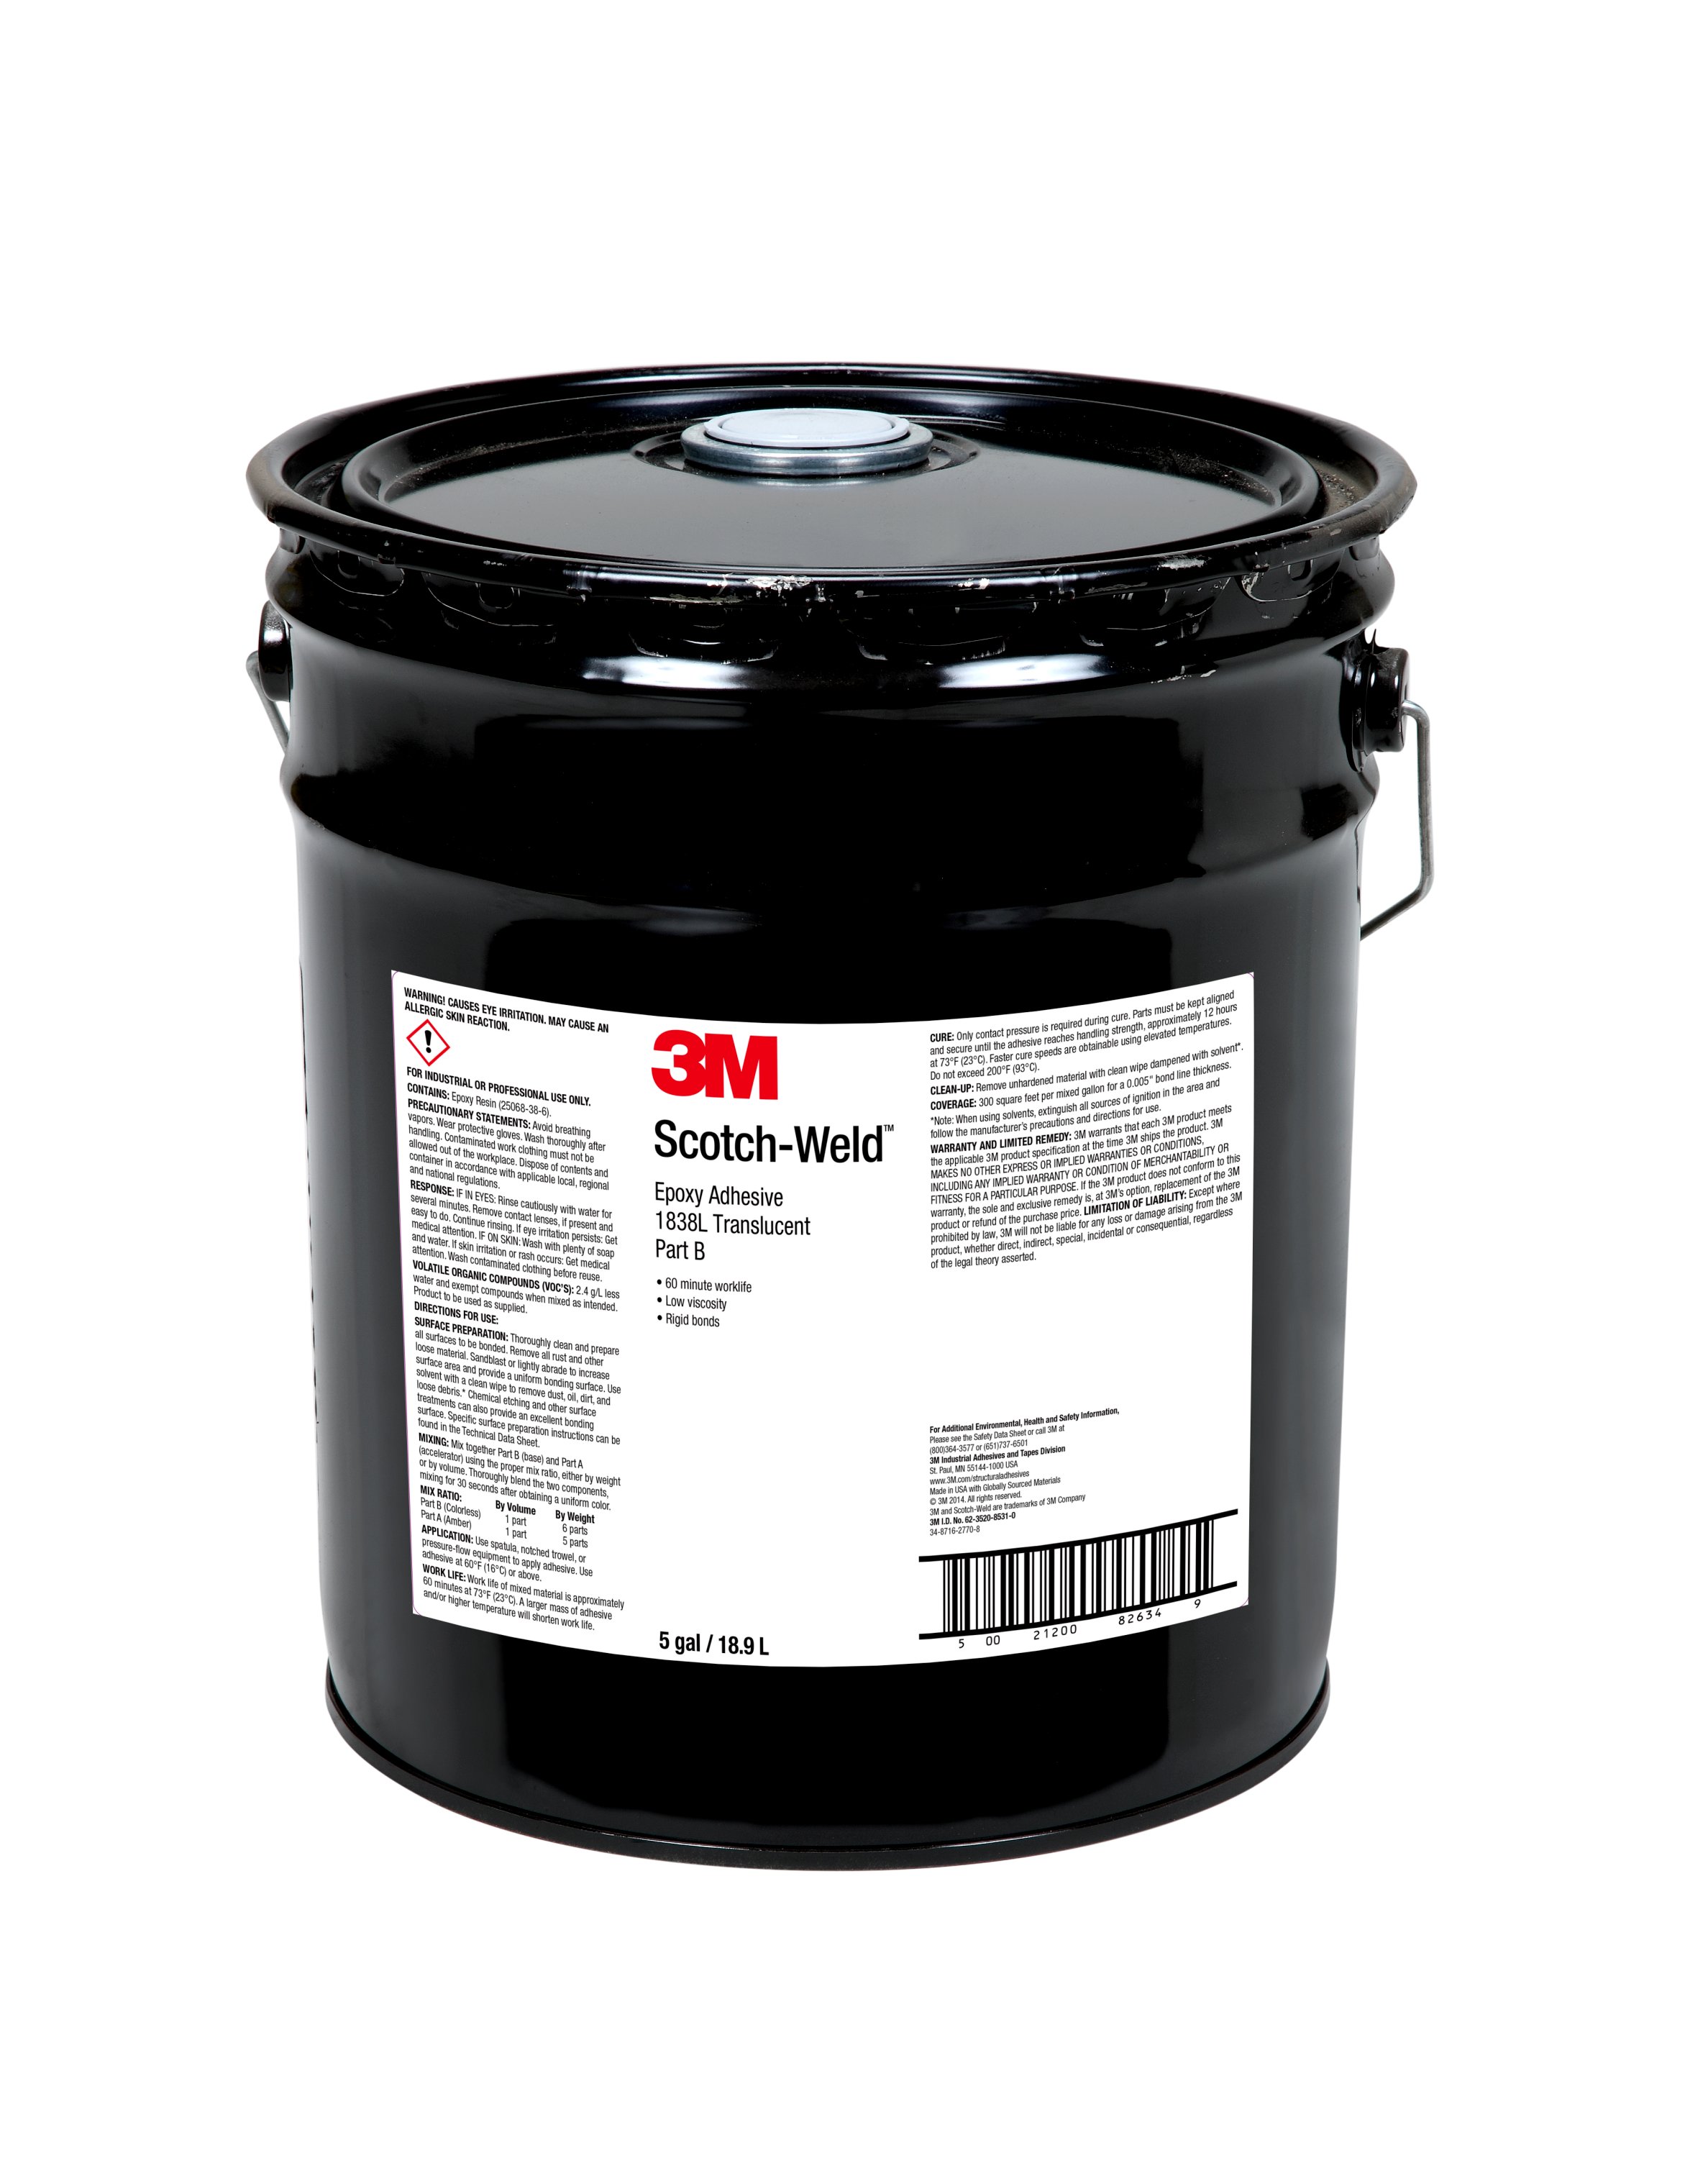 3M™ Scotch-Weld Epoxy Adhesive 1838L is a flowable product with low viscosity to ensure application is precise